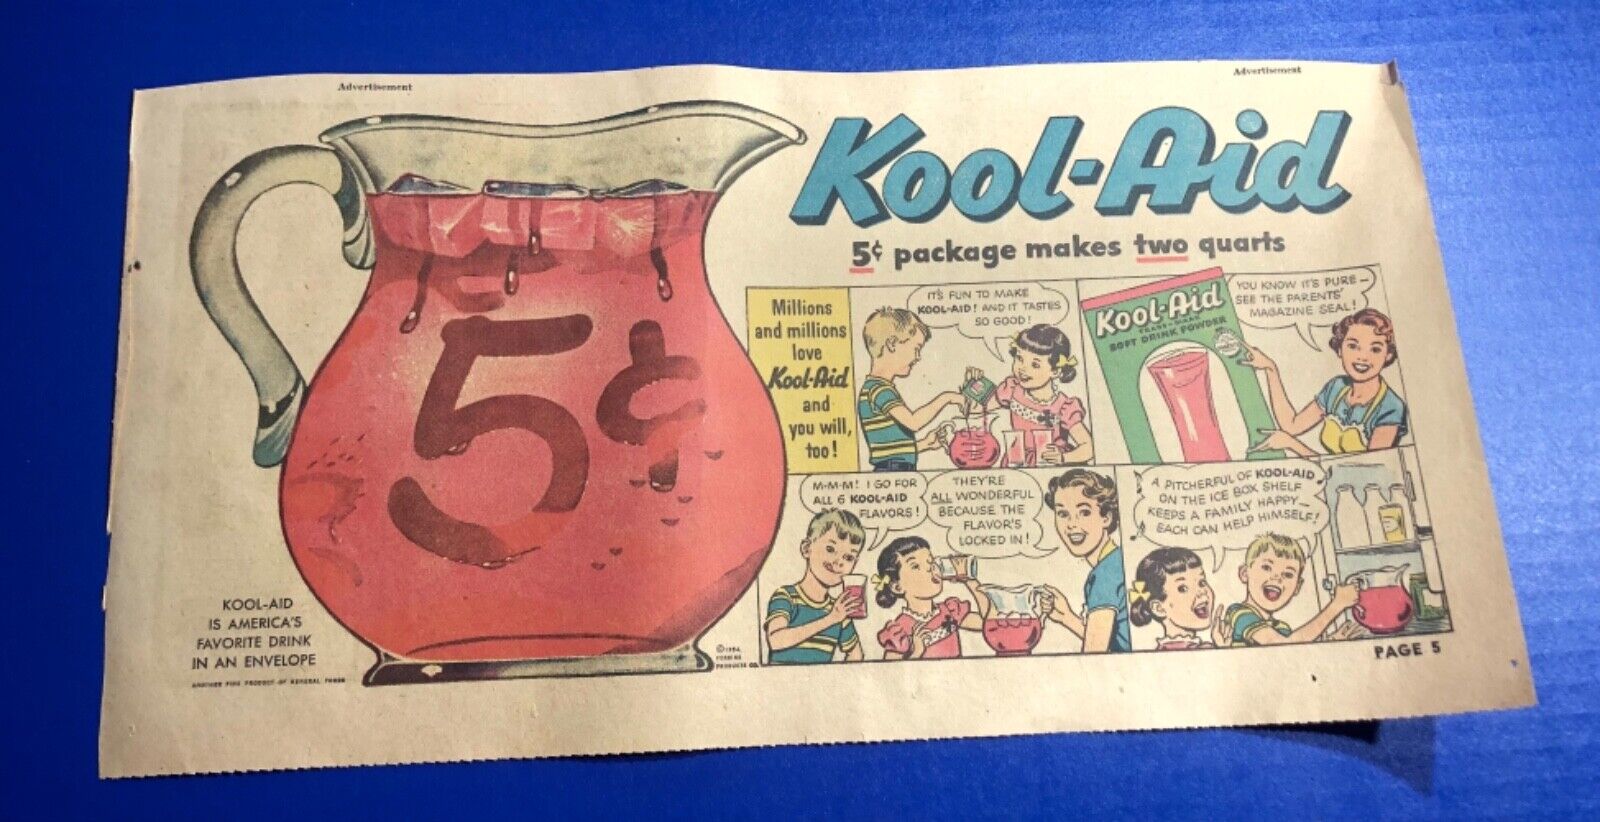 A vintage newspaper advertisement for Kool-Aid, likely illustrated by John C Howard, showcasing the iconic drink in a visually appealing manner.